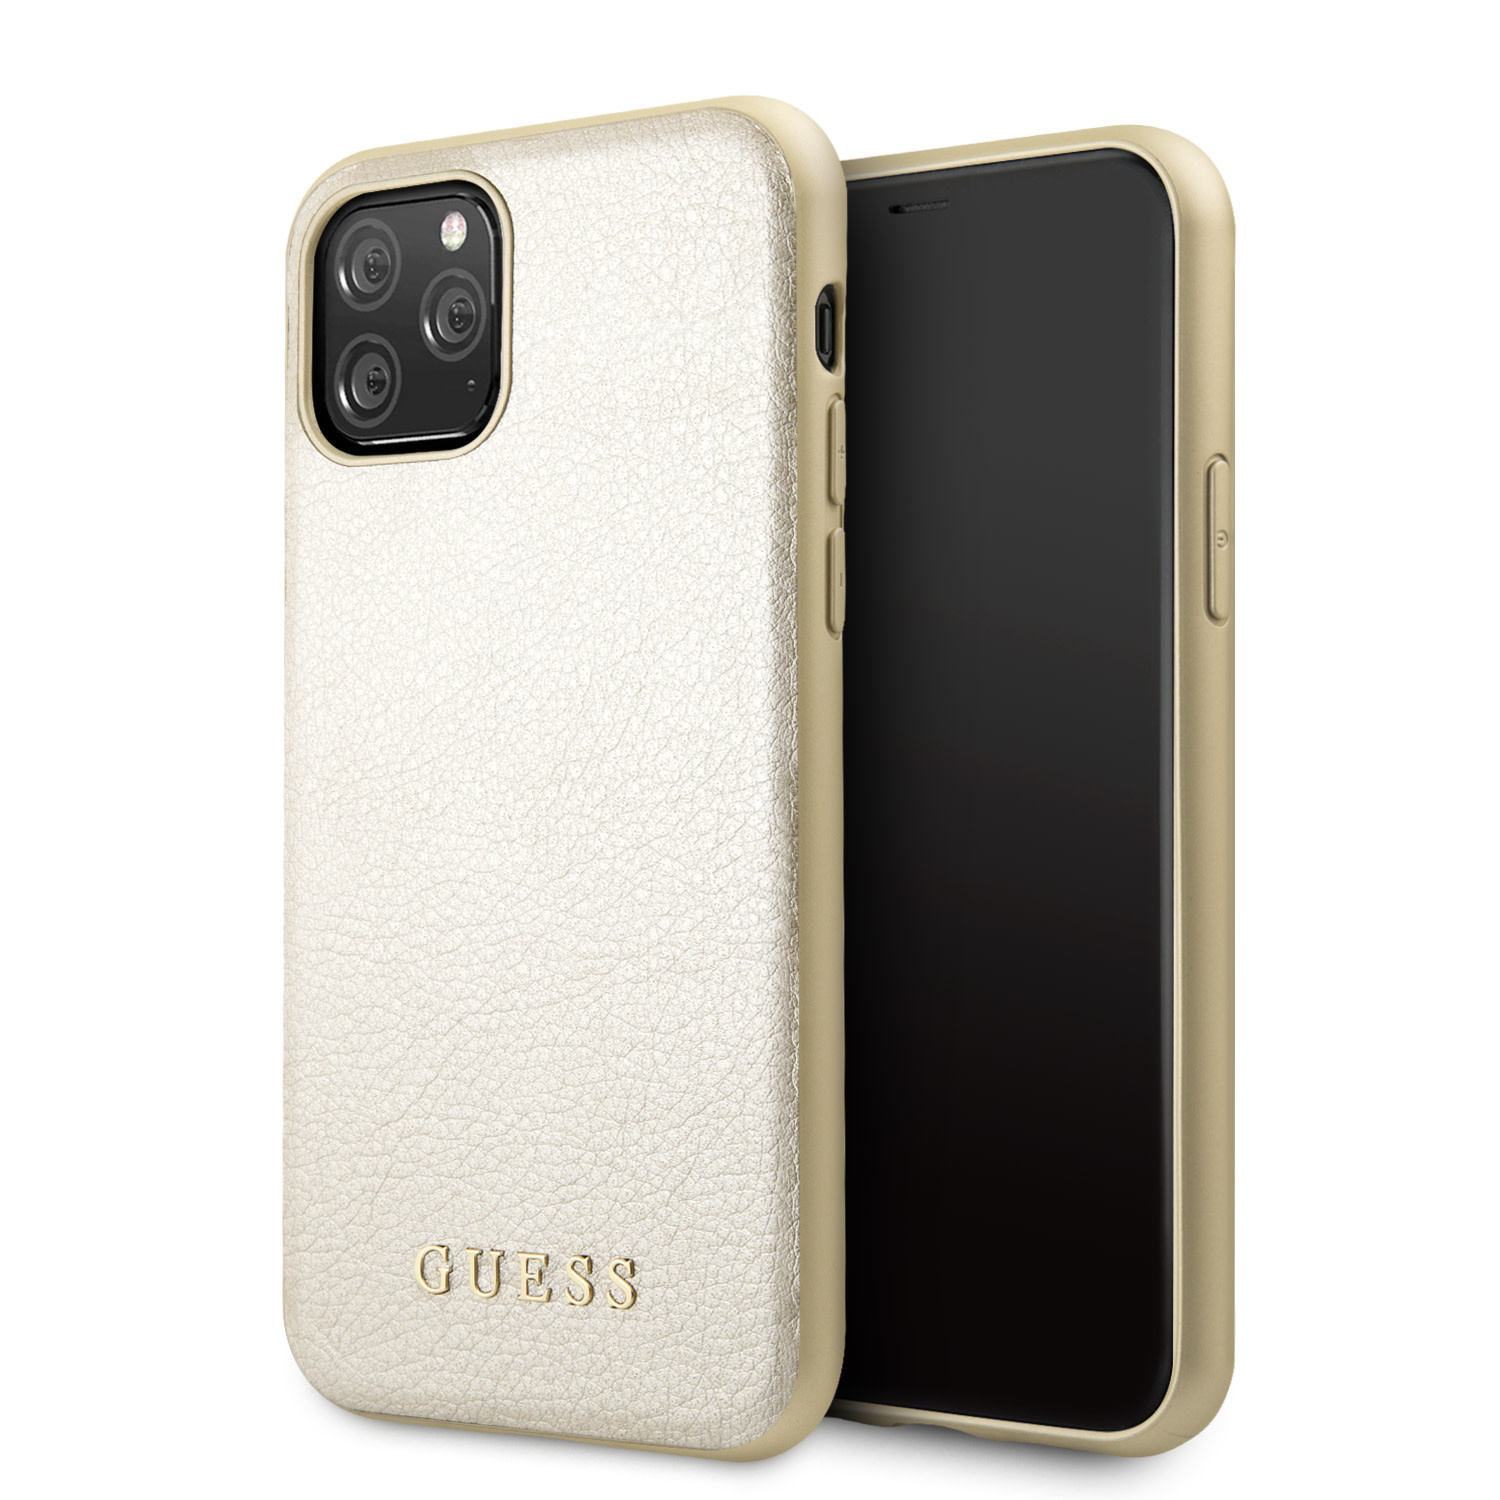 Ga wandelen marmeren straal Guess - backcover hoes - iPhone 11 Pro - Goud | CasualCases